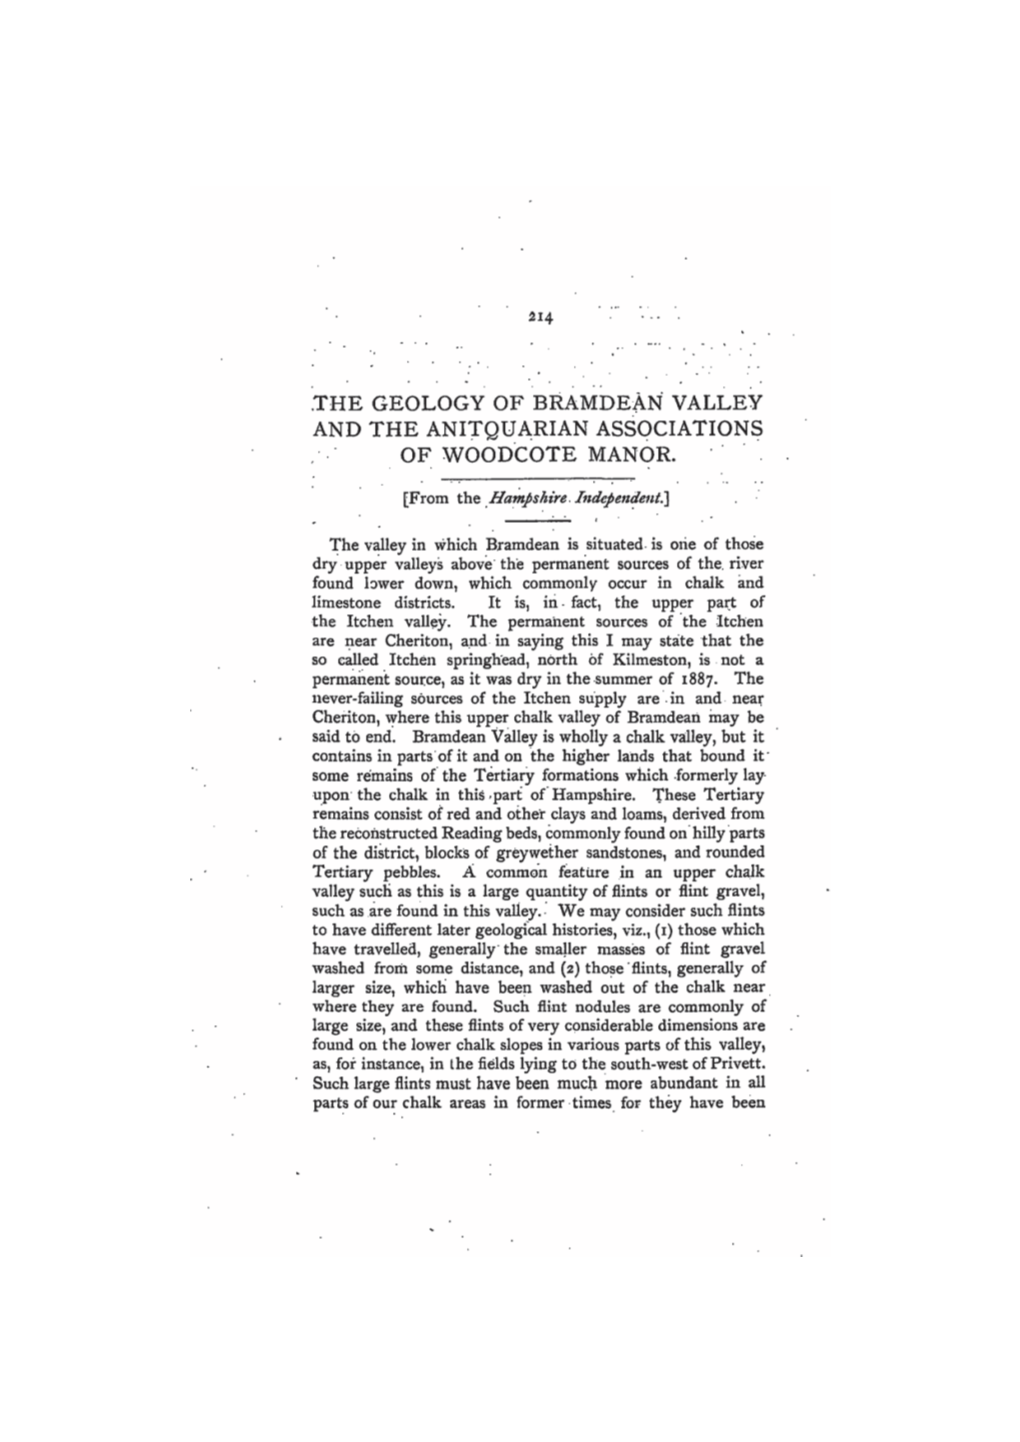 The Geology of Bramdean Valley and the Anitquarian Associations of Woodcote Manor